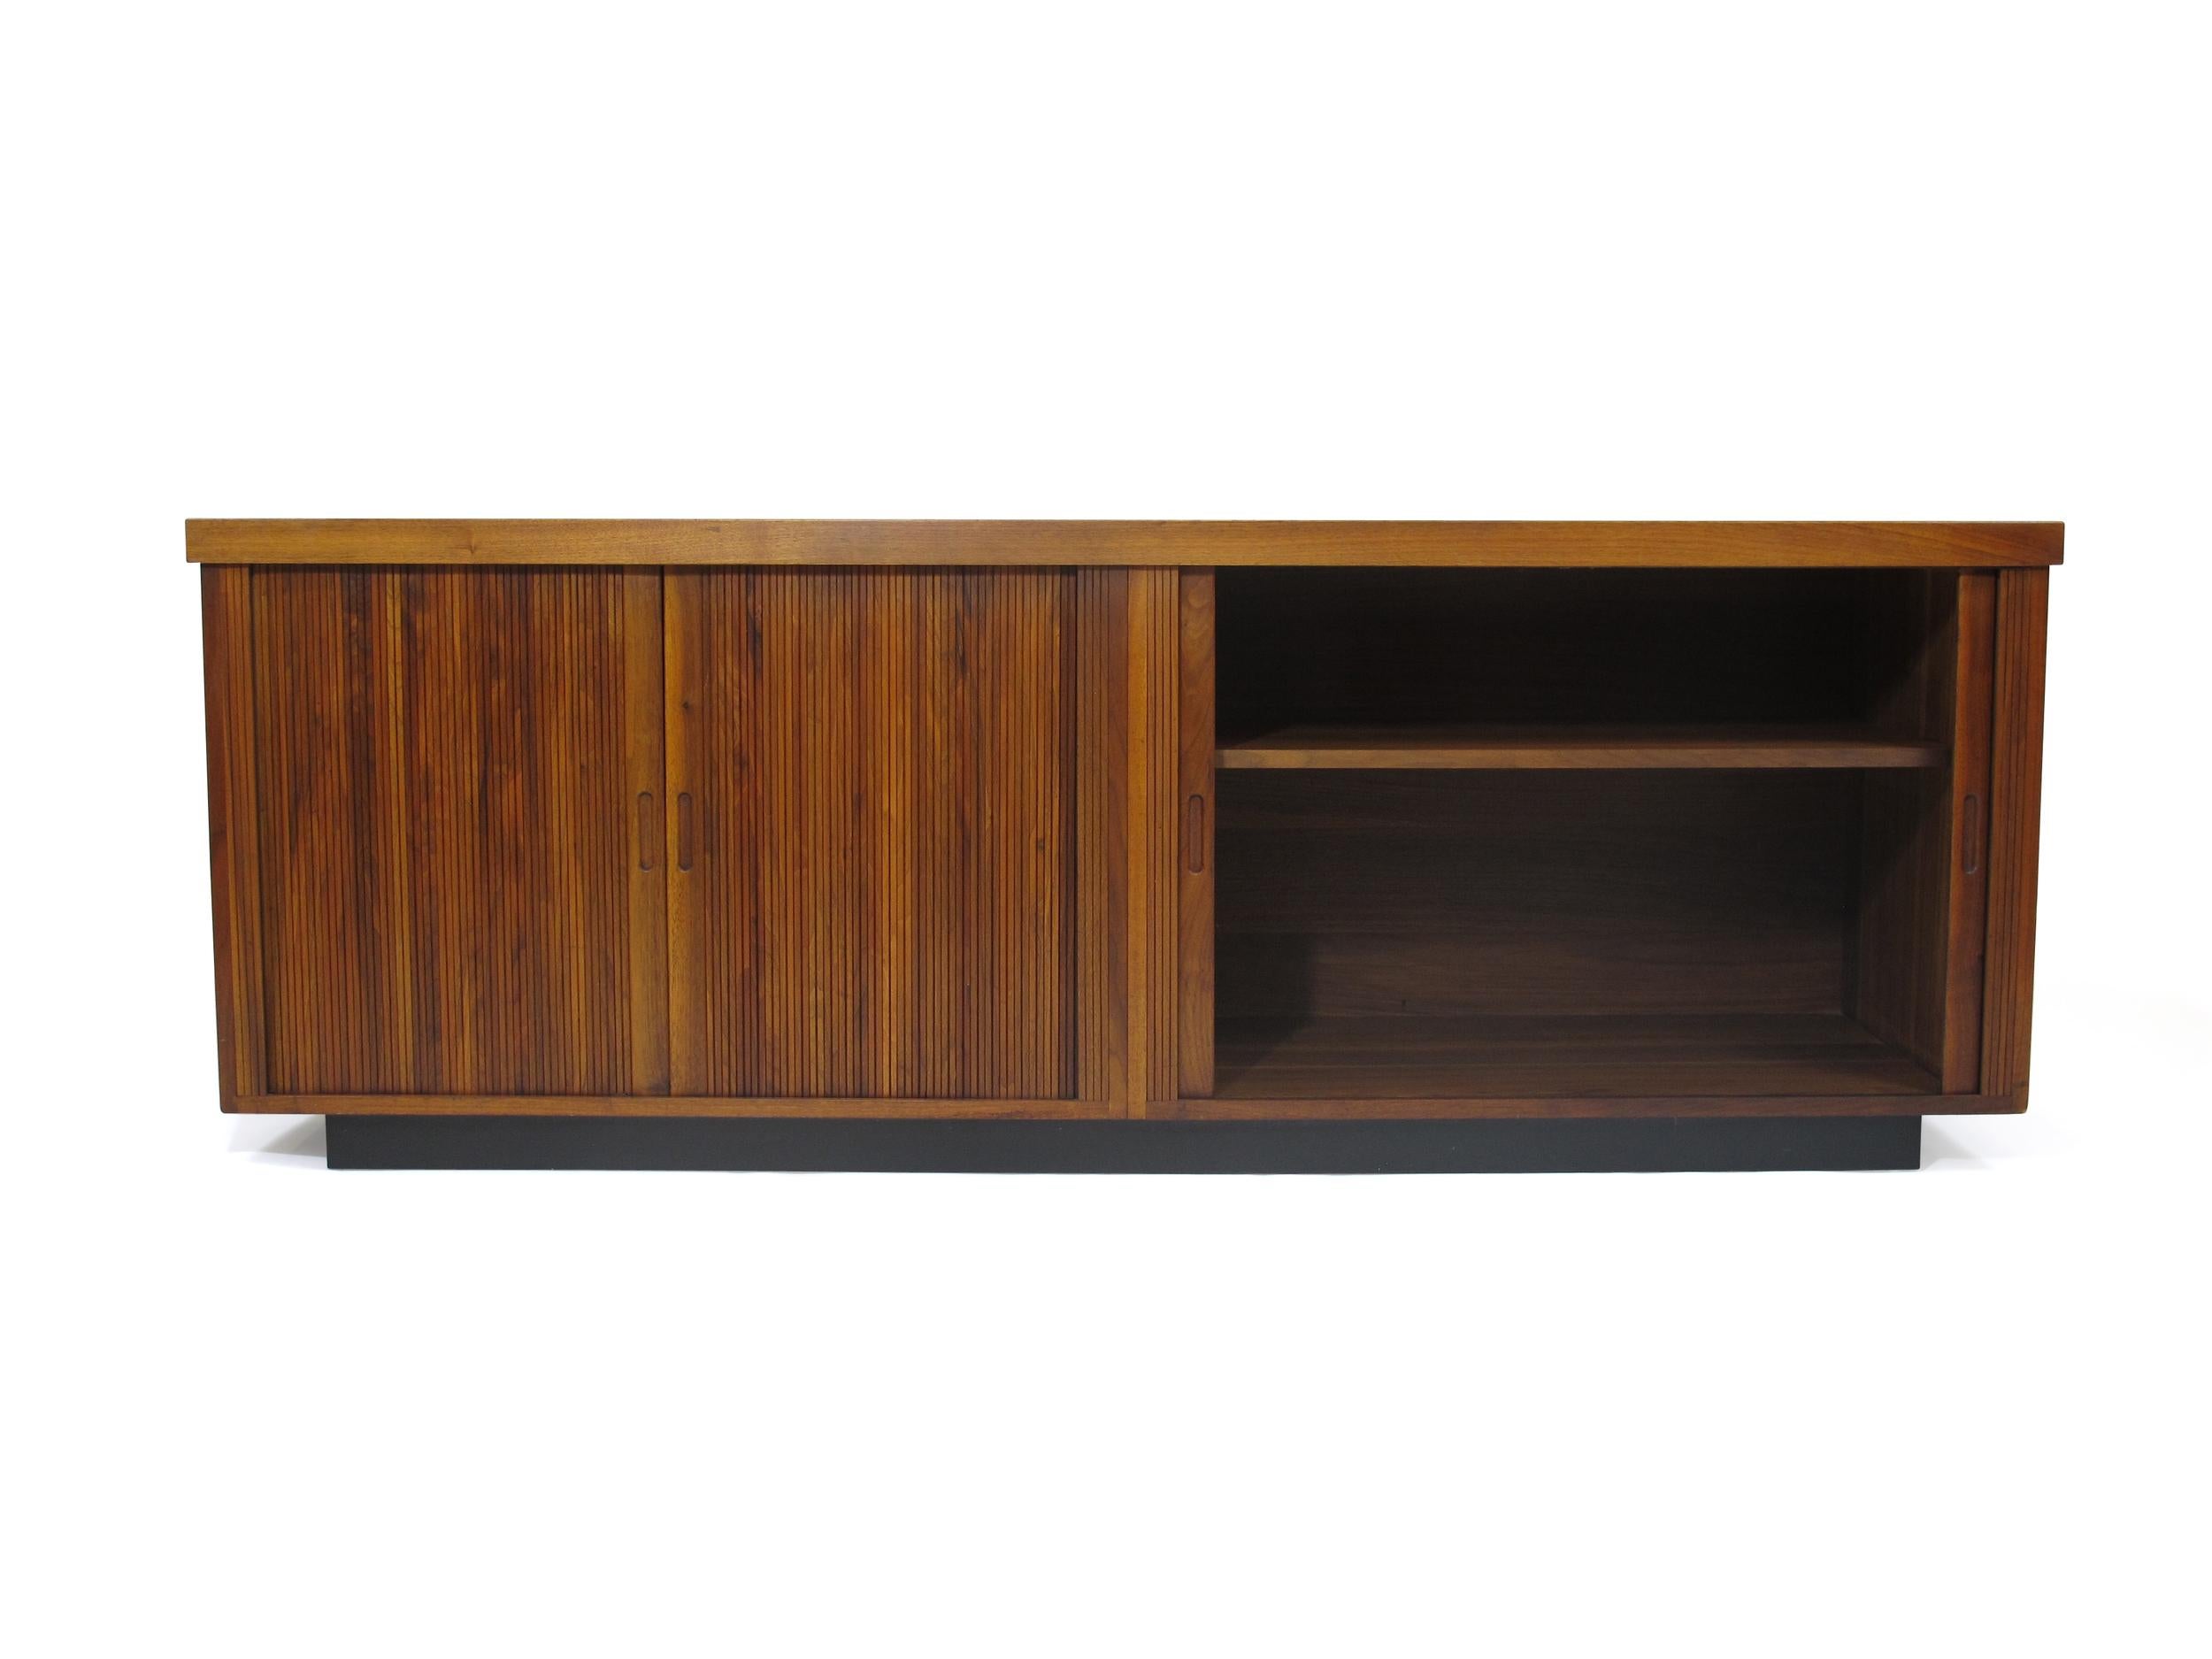 Midcentury Barzilay walnut credenza with pair of tambour doors with inset pulls which open to reveal an interior with adjustable shelves. Raised on a plinth base with black Formica top surface. Very good original condition.